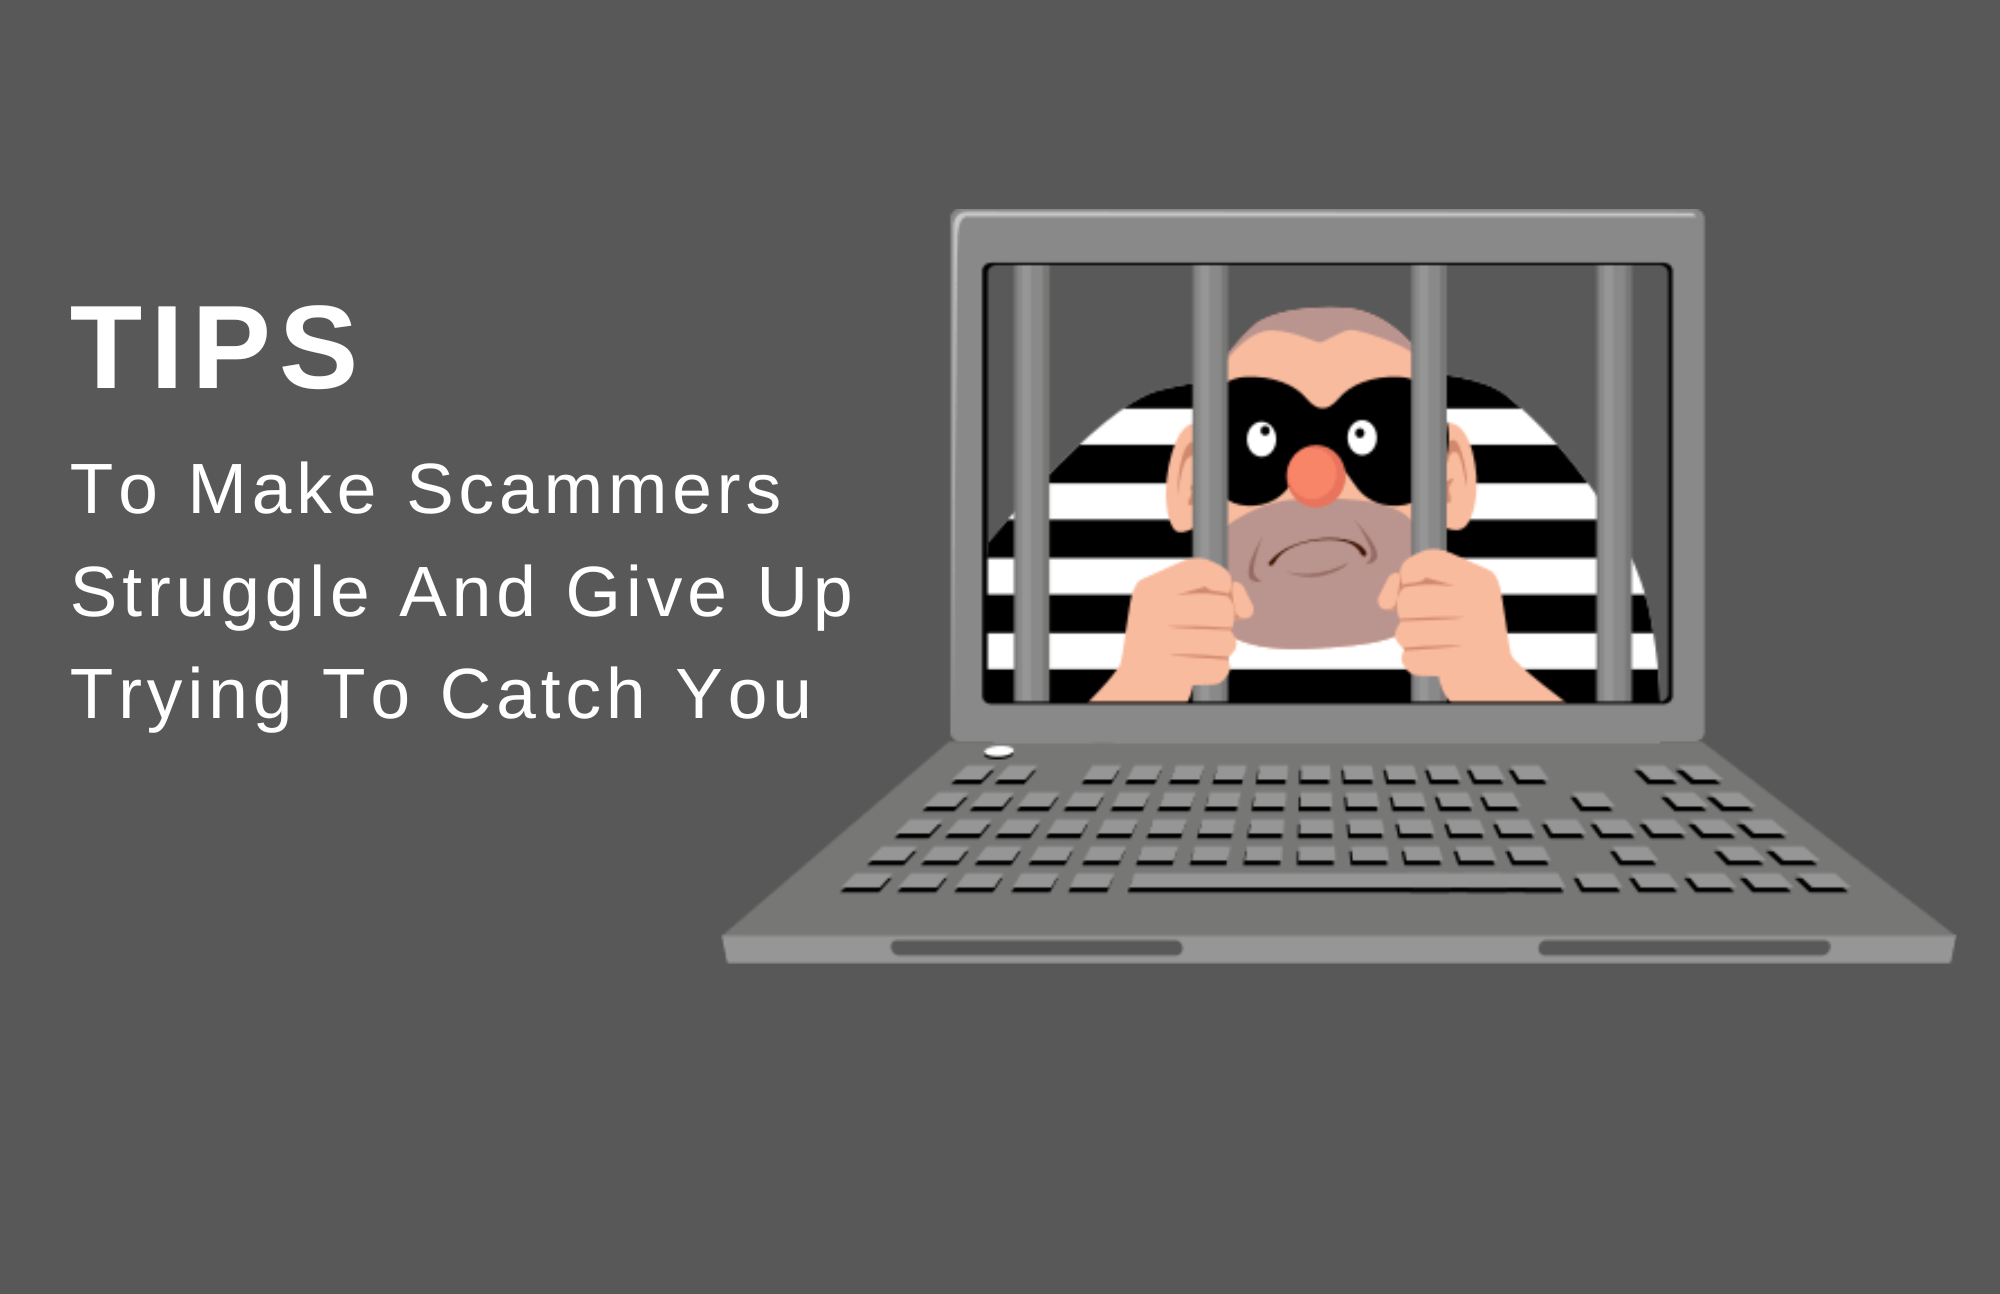 Protect Your Money From Cyber Scams - Tips To Make Scammers Struggle And Give Up Trying To Catch You